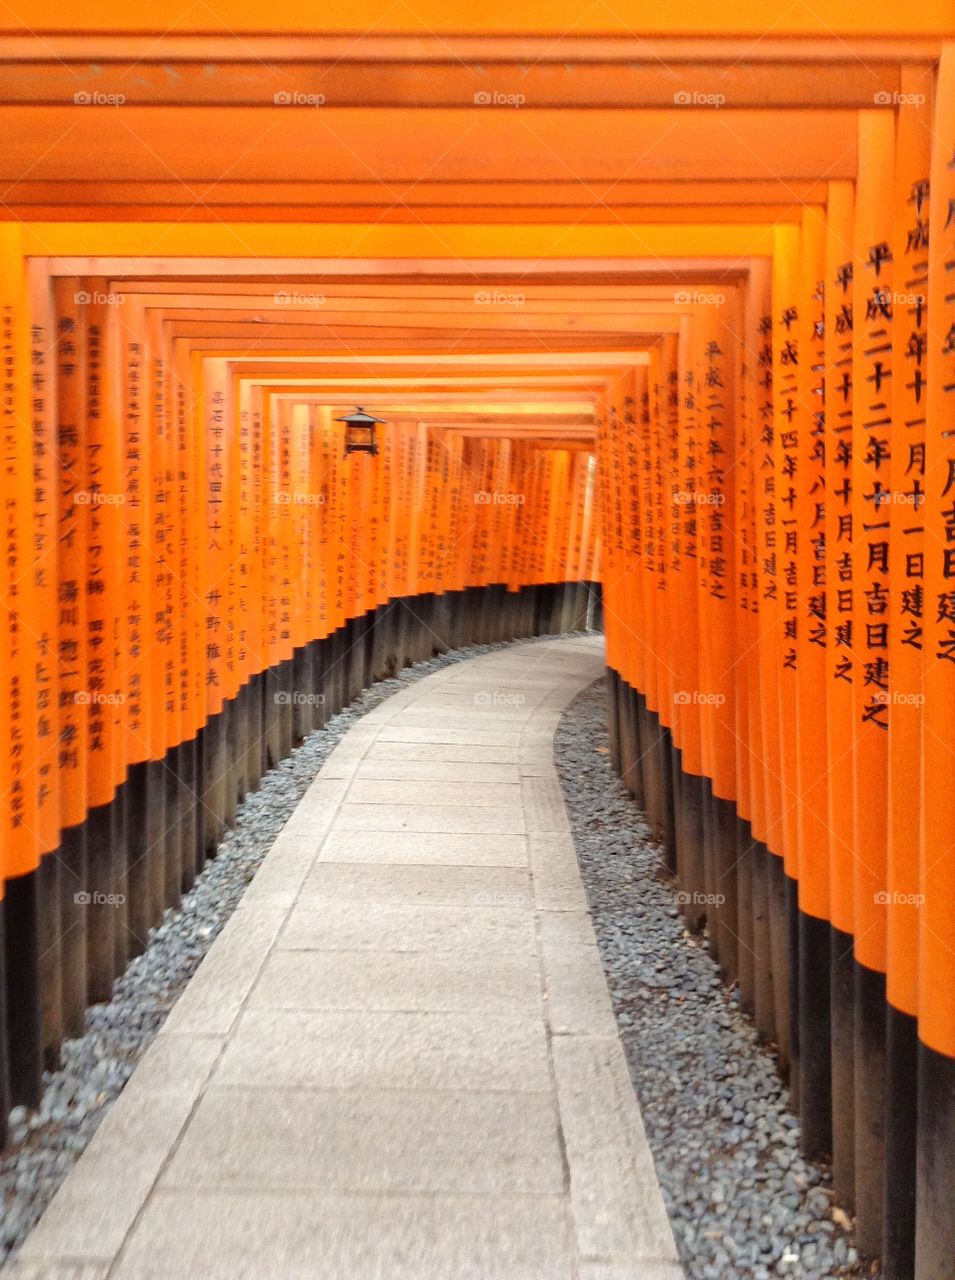 Fushima Inari Taisha . A trip down to Kyoto and this shrine was a must see! The torii gates are beautiful. 